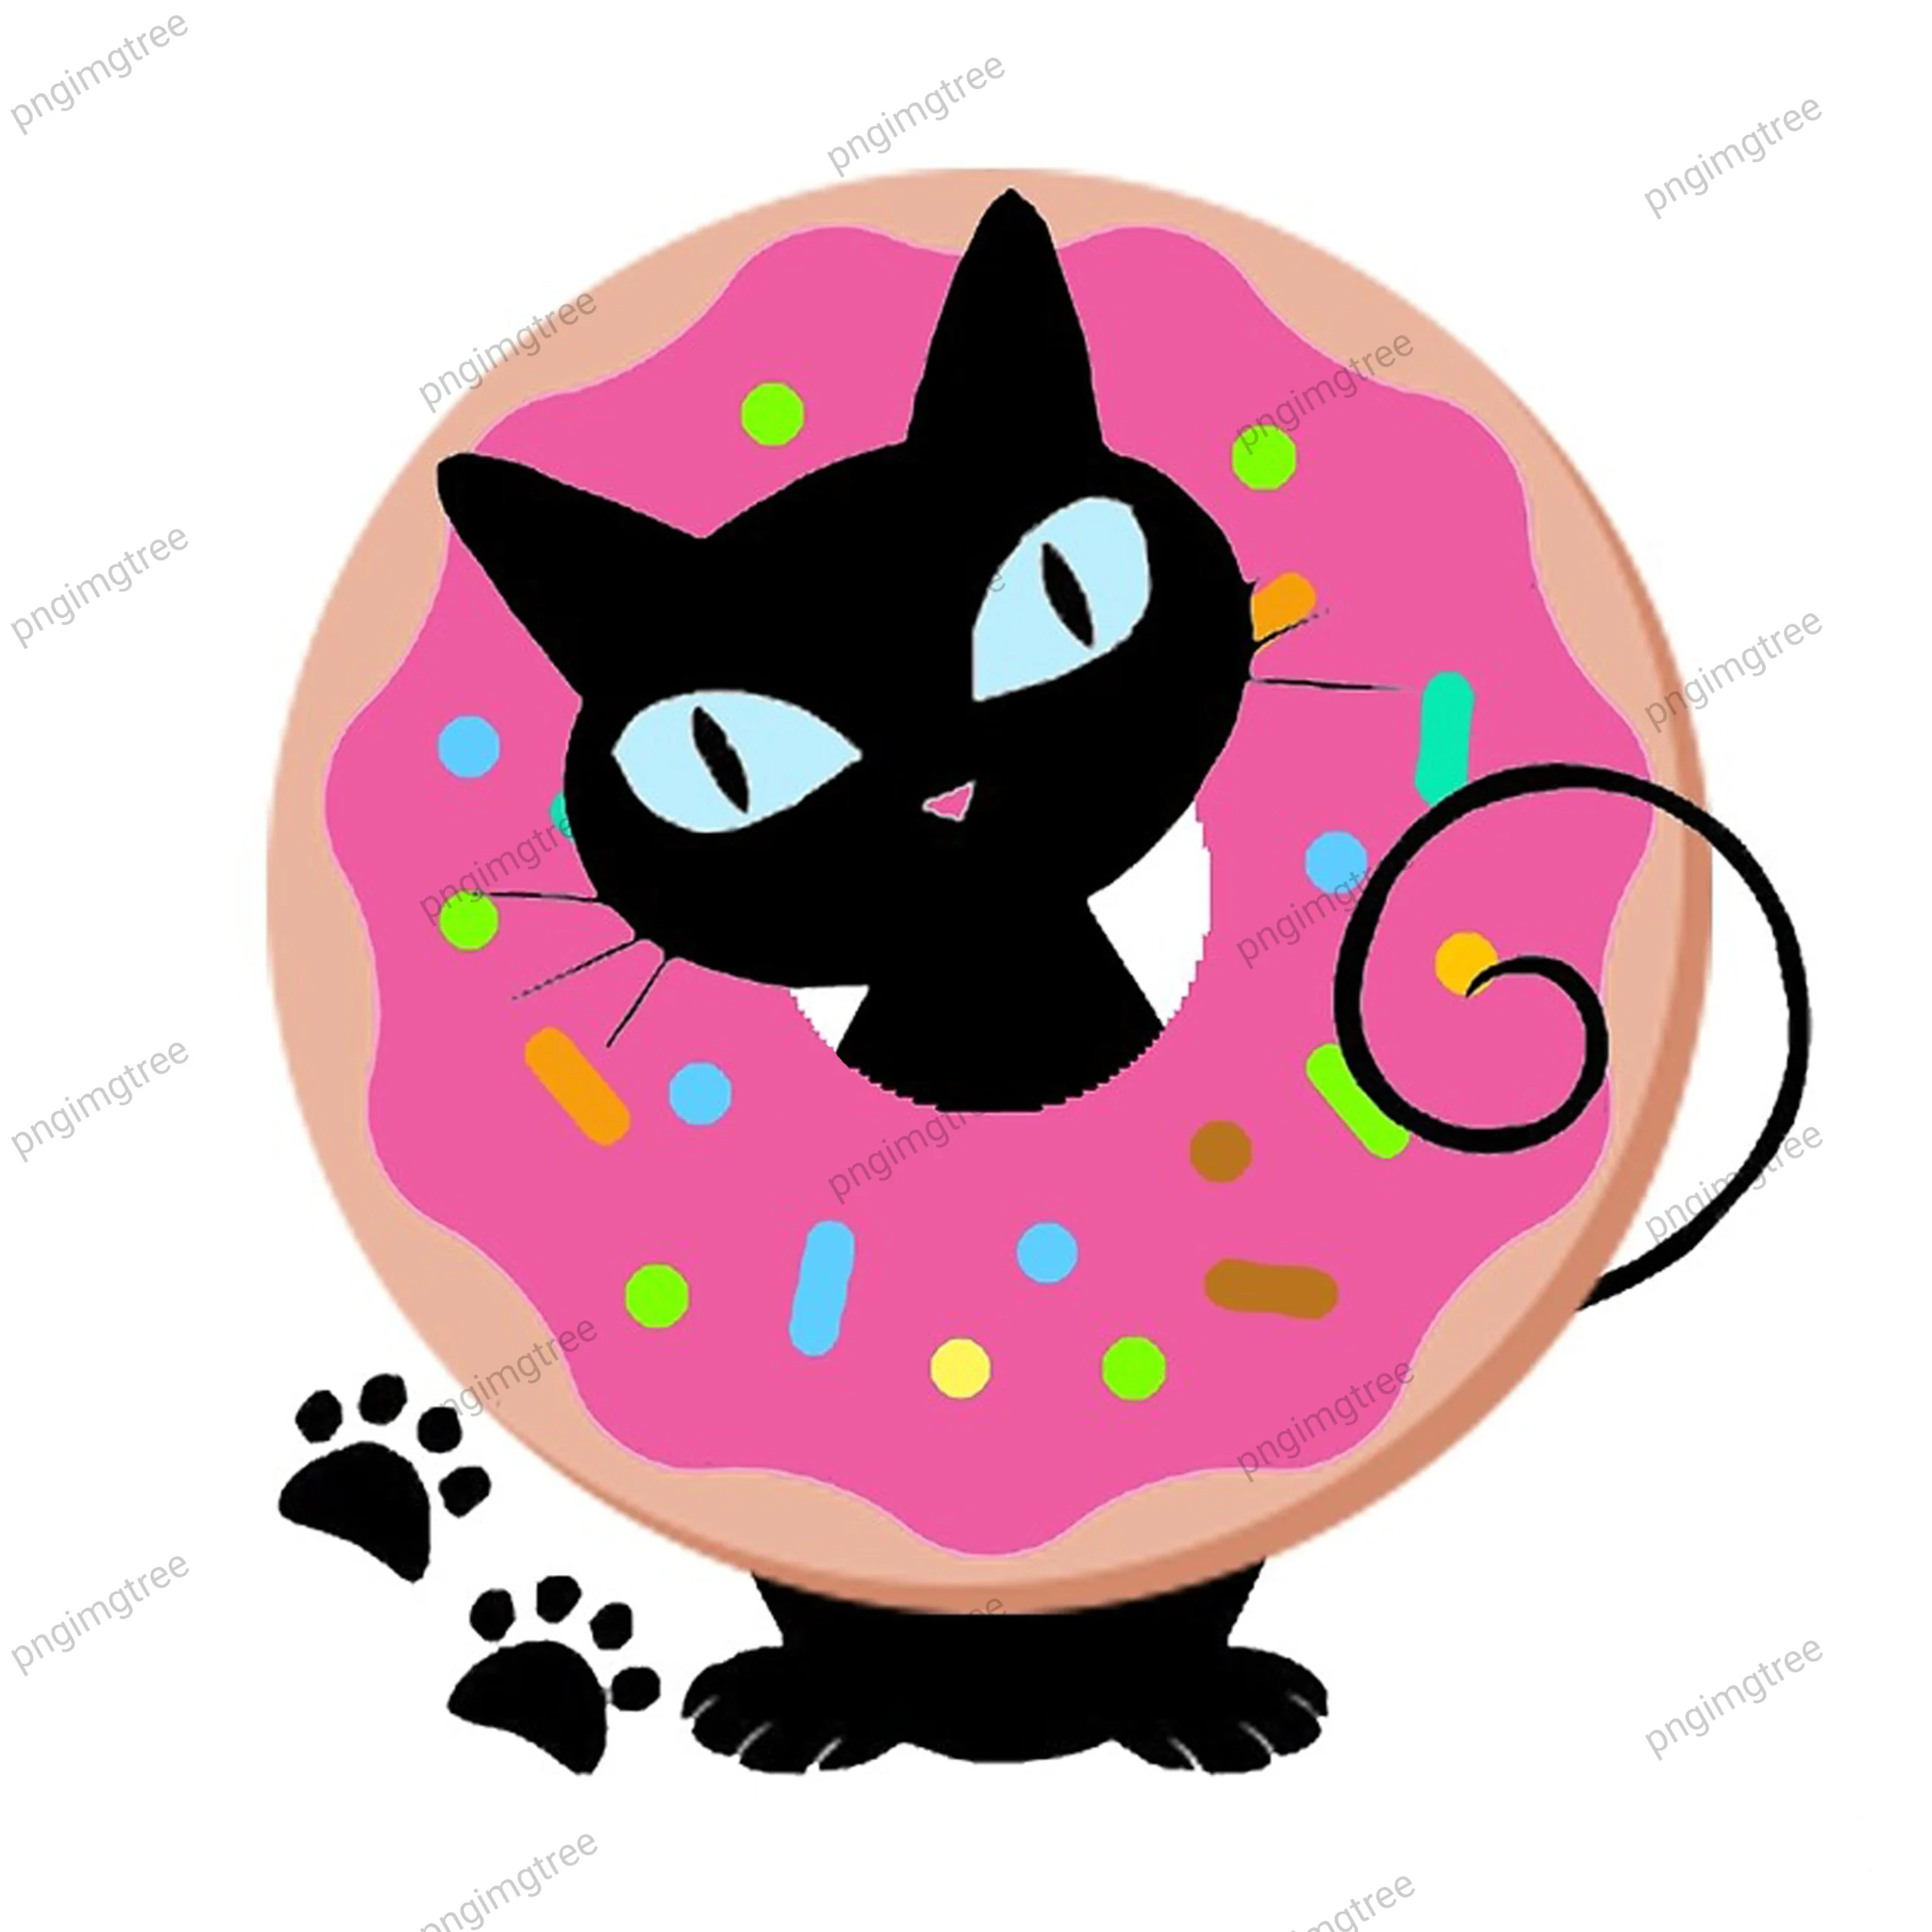 funny black cat inside a delicious donut shaped float with black paw prints on a white background